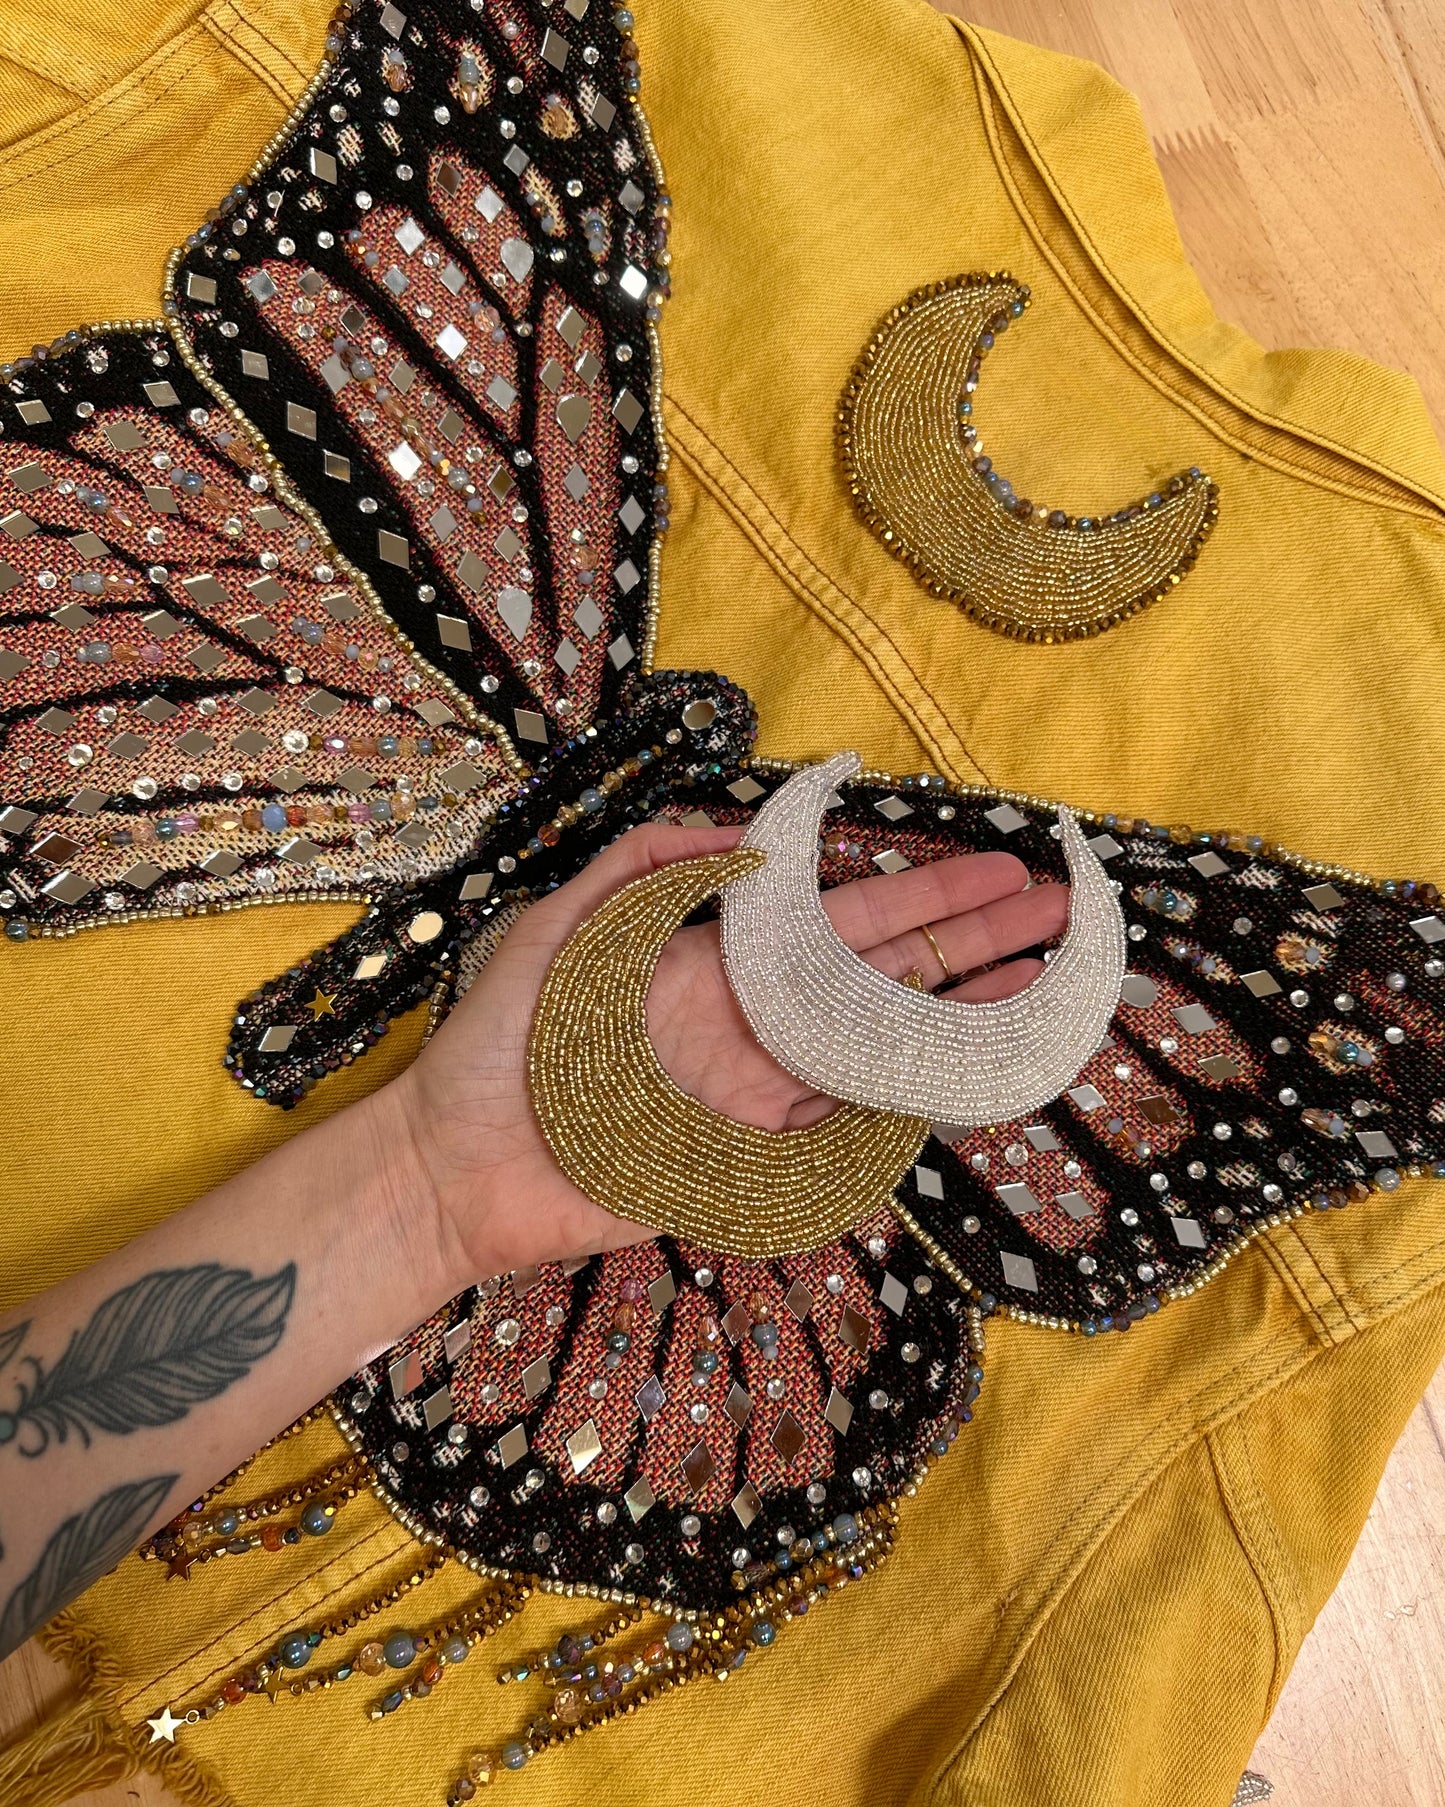 Beaded Moon Patch for Jacket DIY